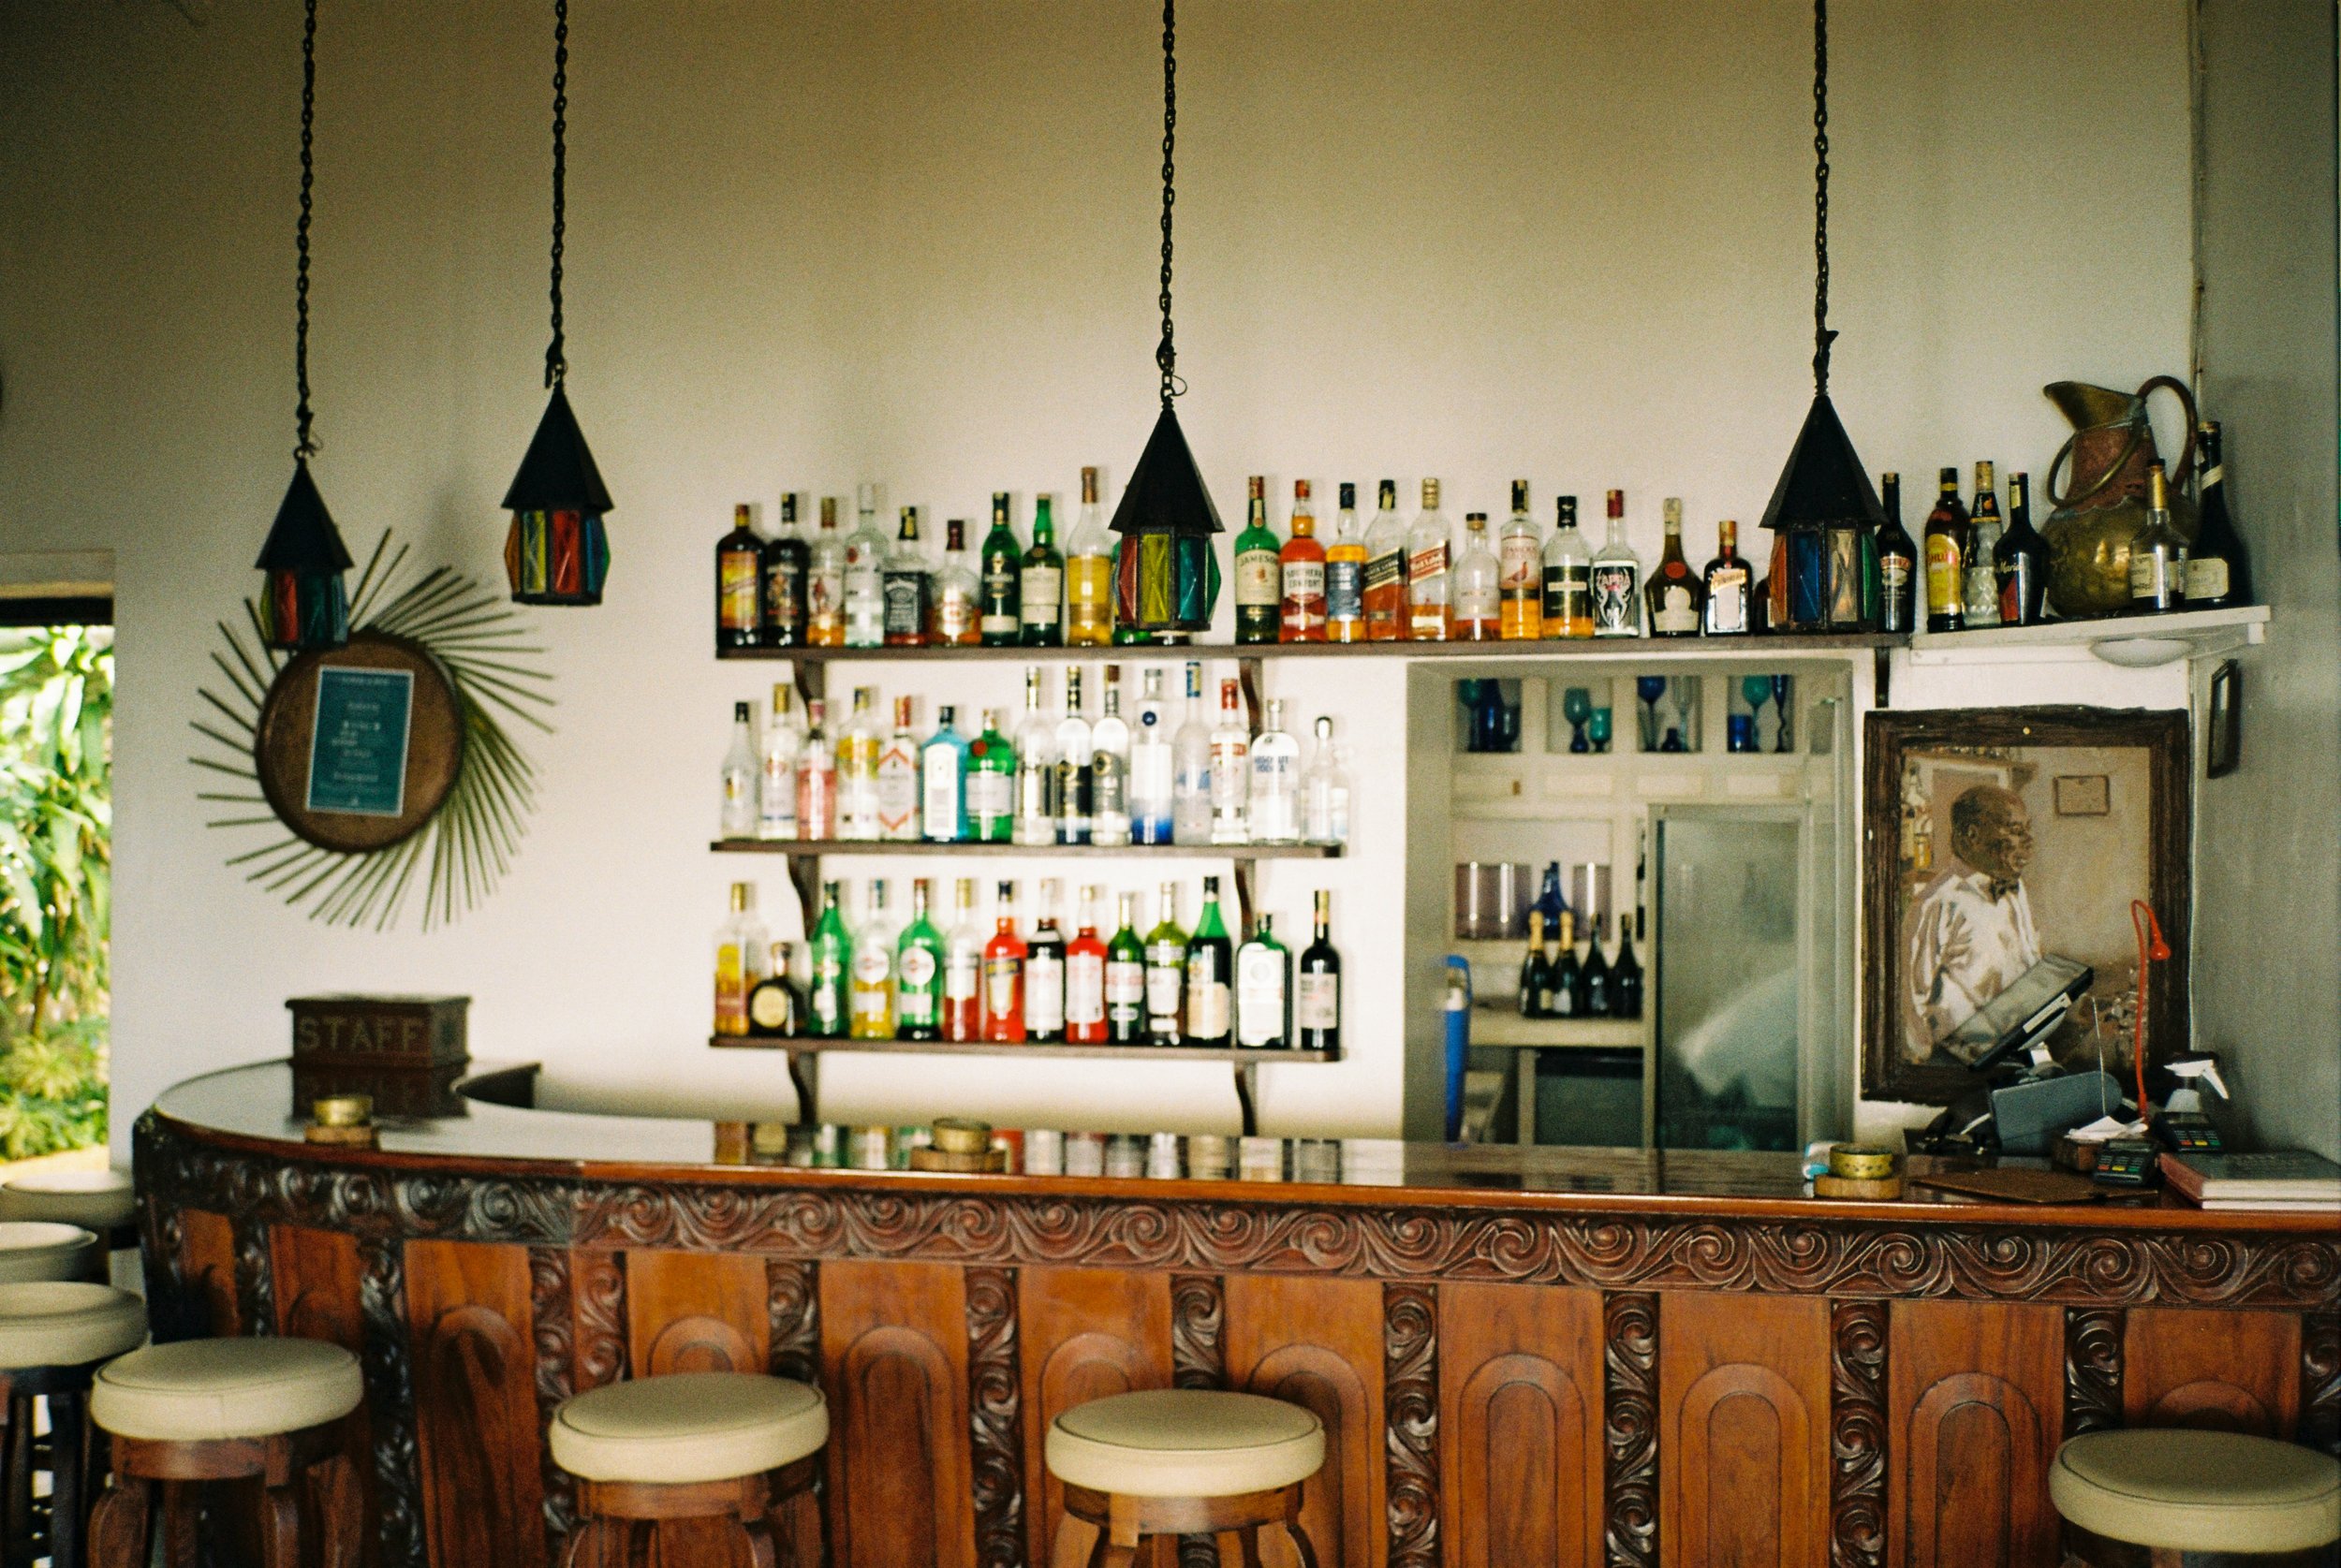 The legendary bar at Peponi's